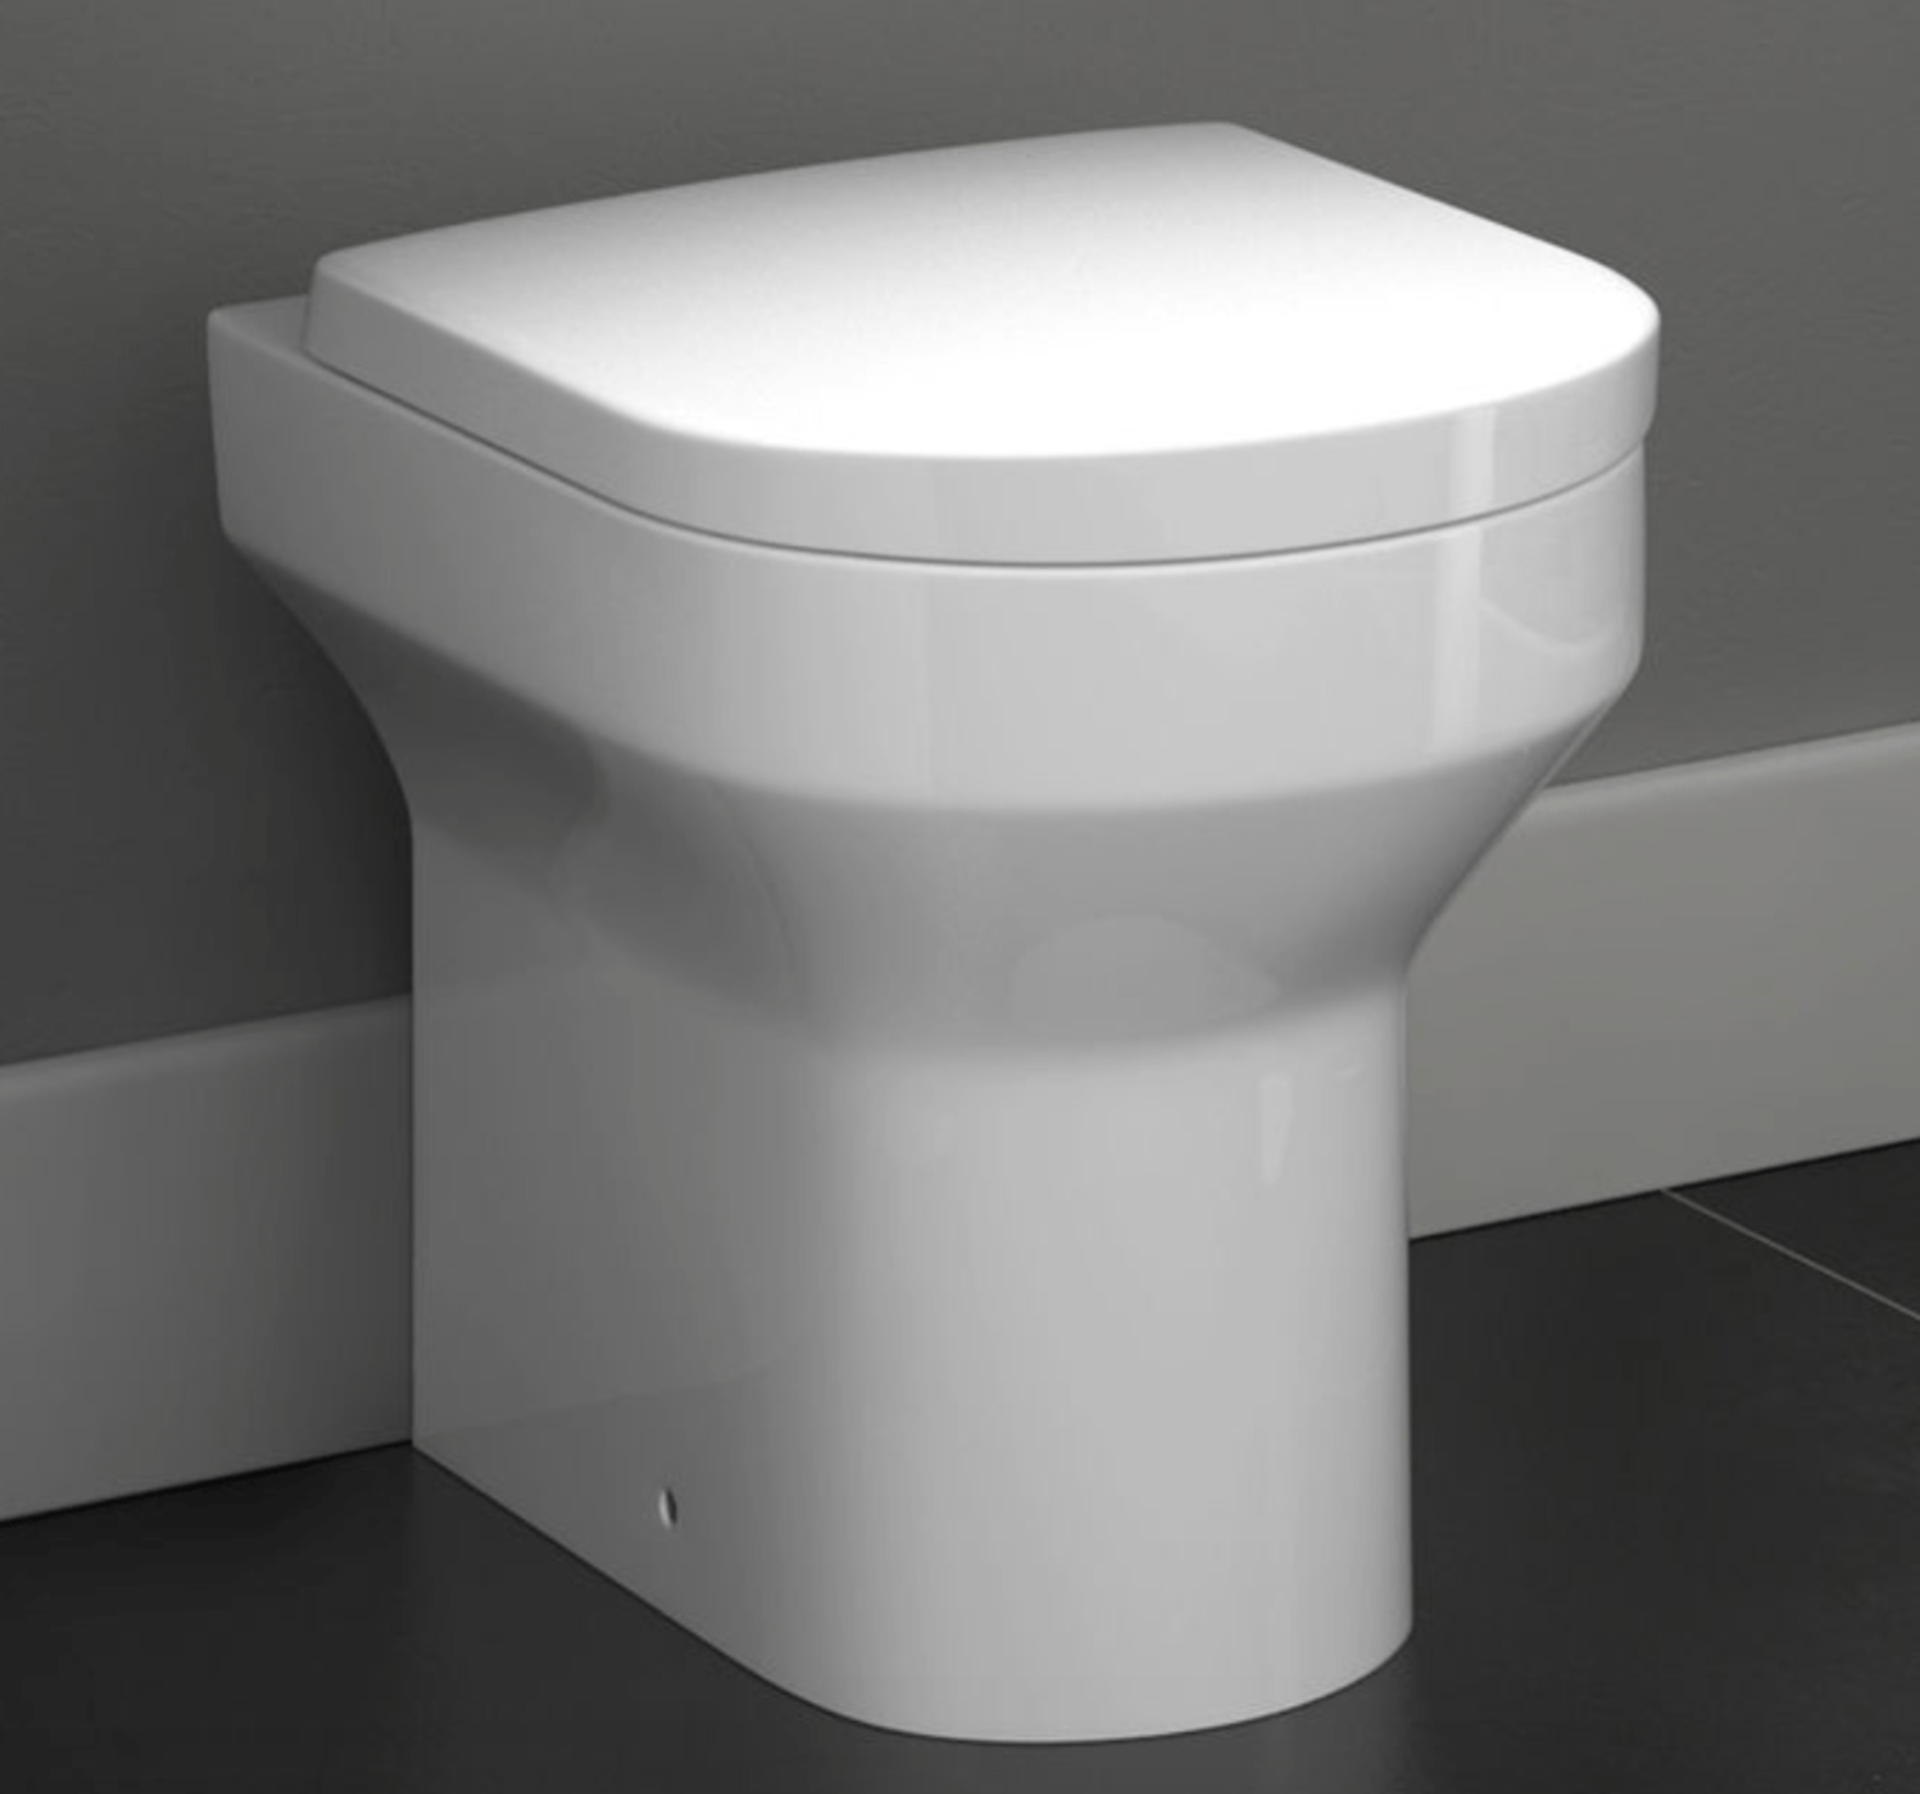 New Boxed 1200mm Alexis White Gloss Left Hand Vanity Unit Florence Pan. RRP £999.99.Contempora... - Image 3 of 4